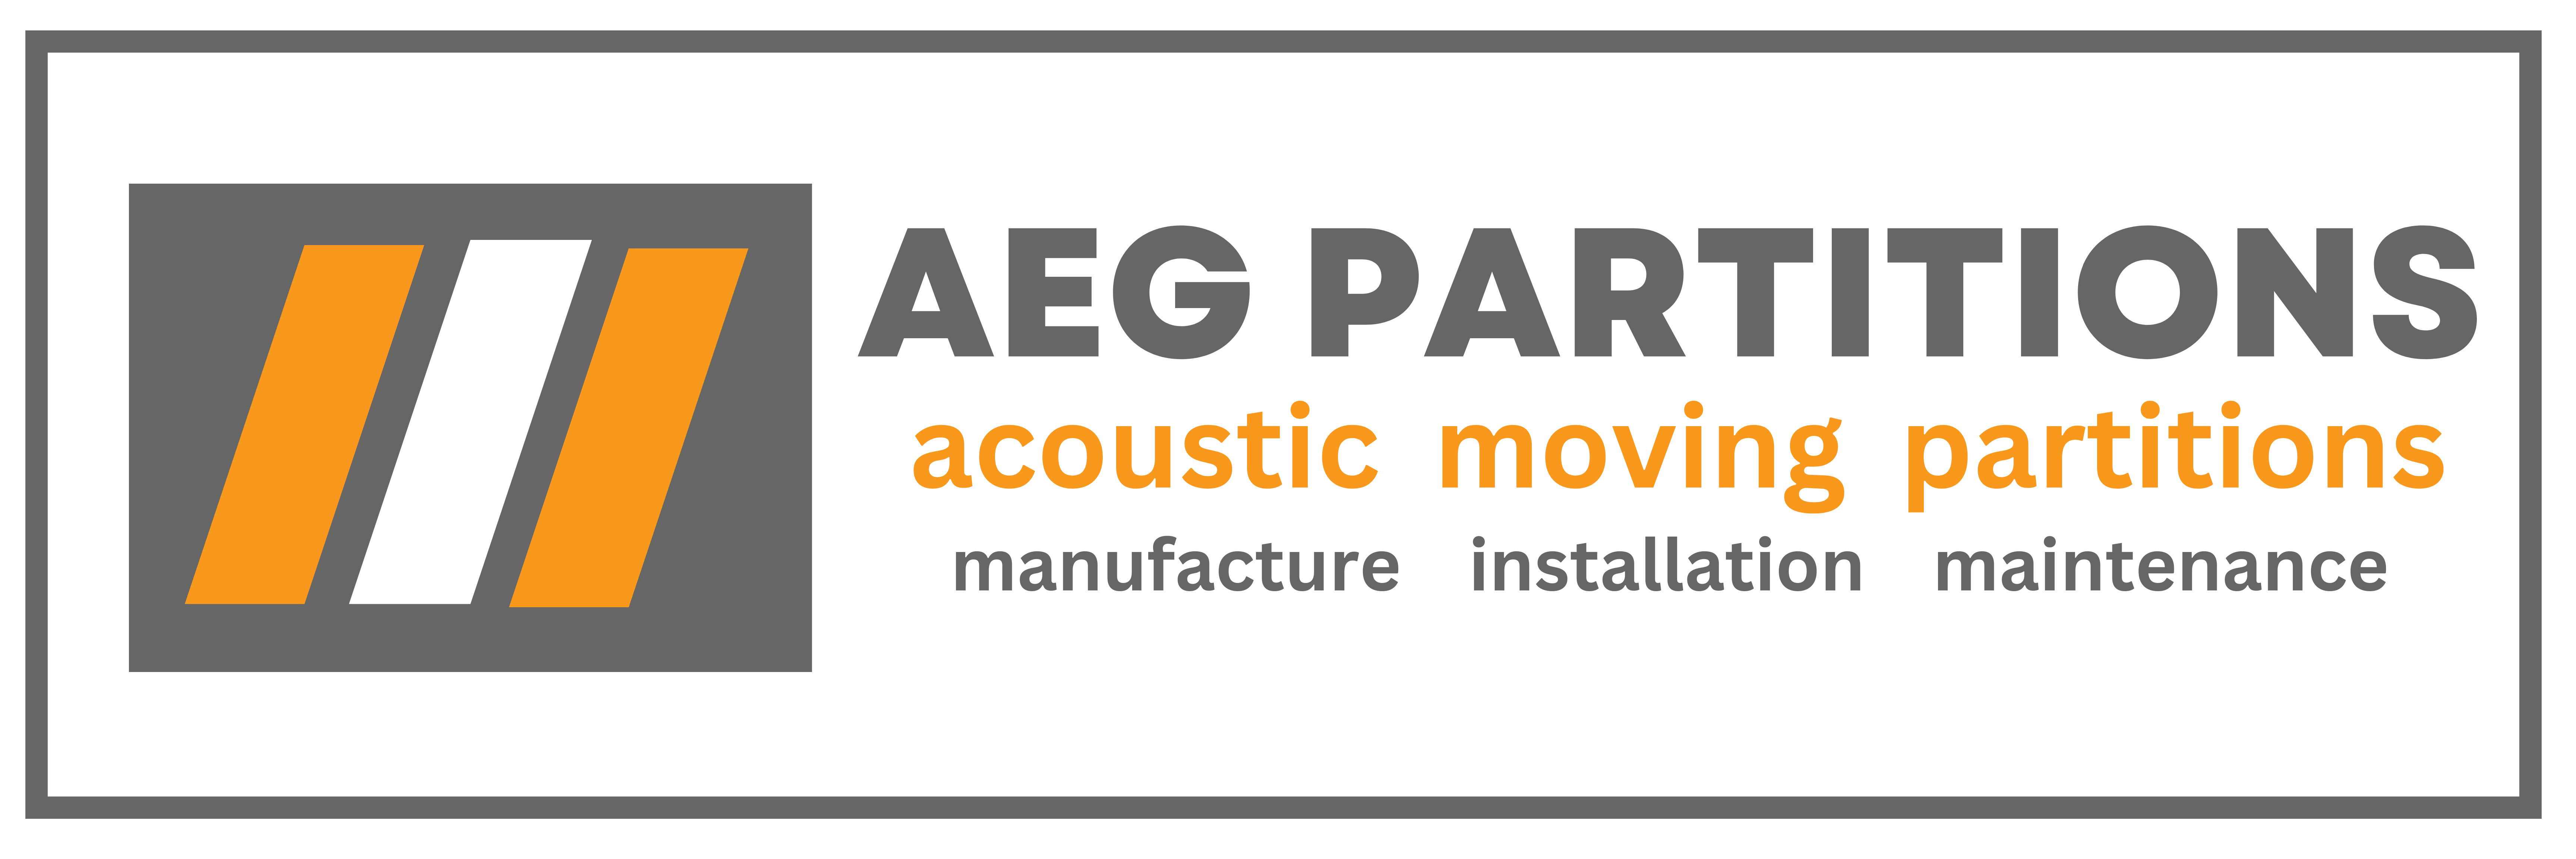 AEG Partitions